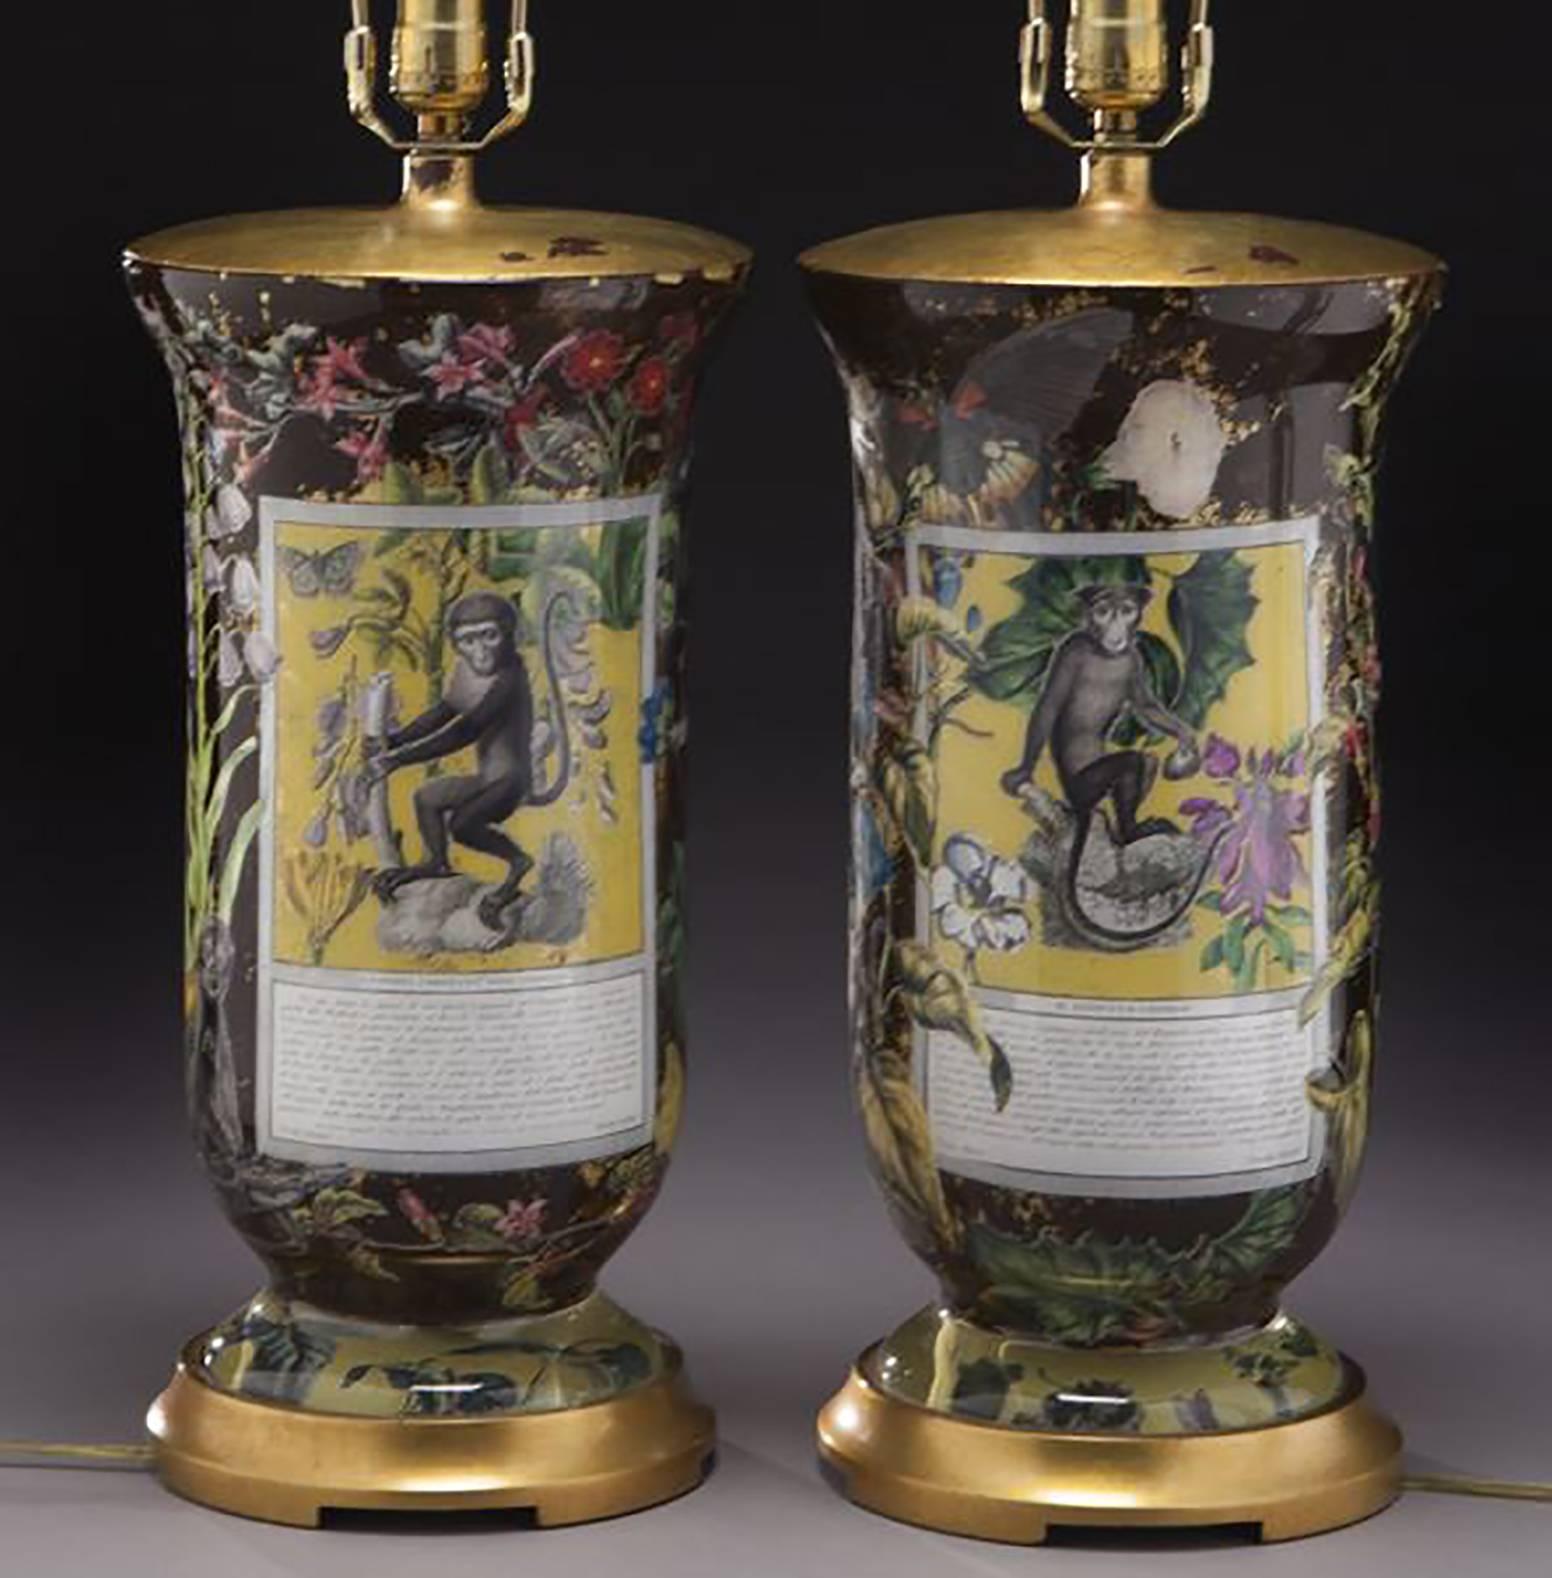 Découpage Pair of 20th Century Reverse Decorated Glass Table Lamps